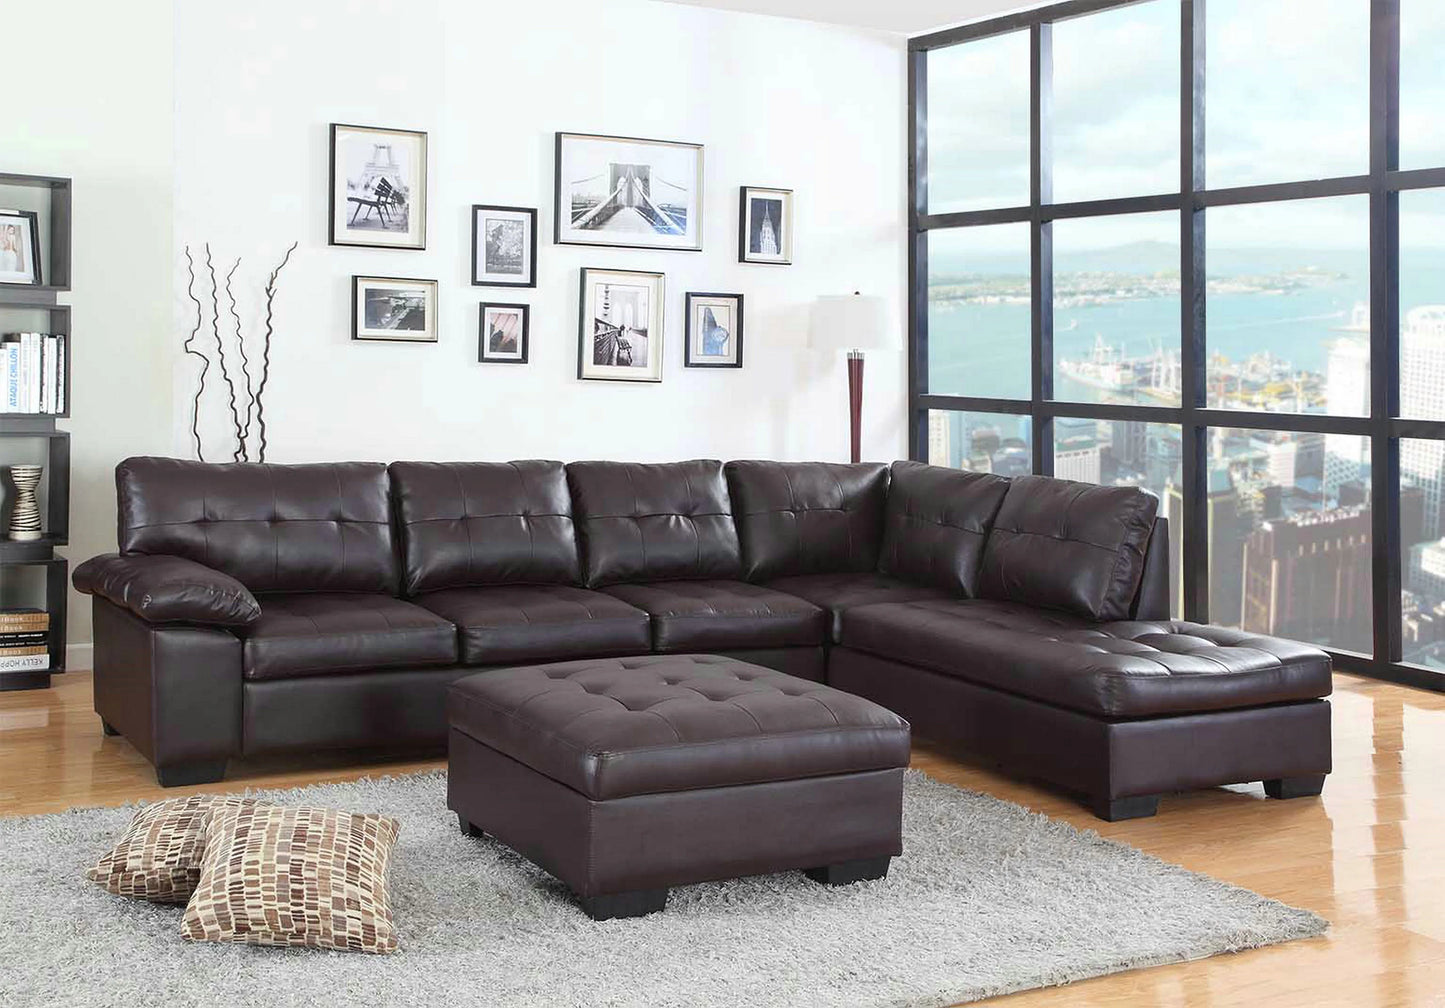 2 pc espresso faux leather sectional sofa set with tufted seat and backs